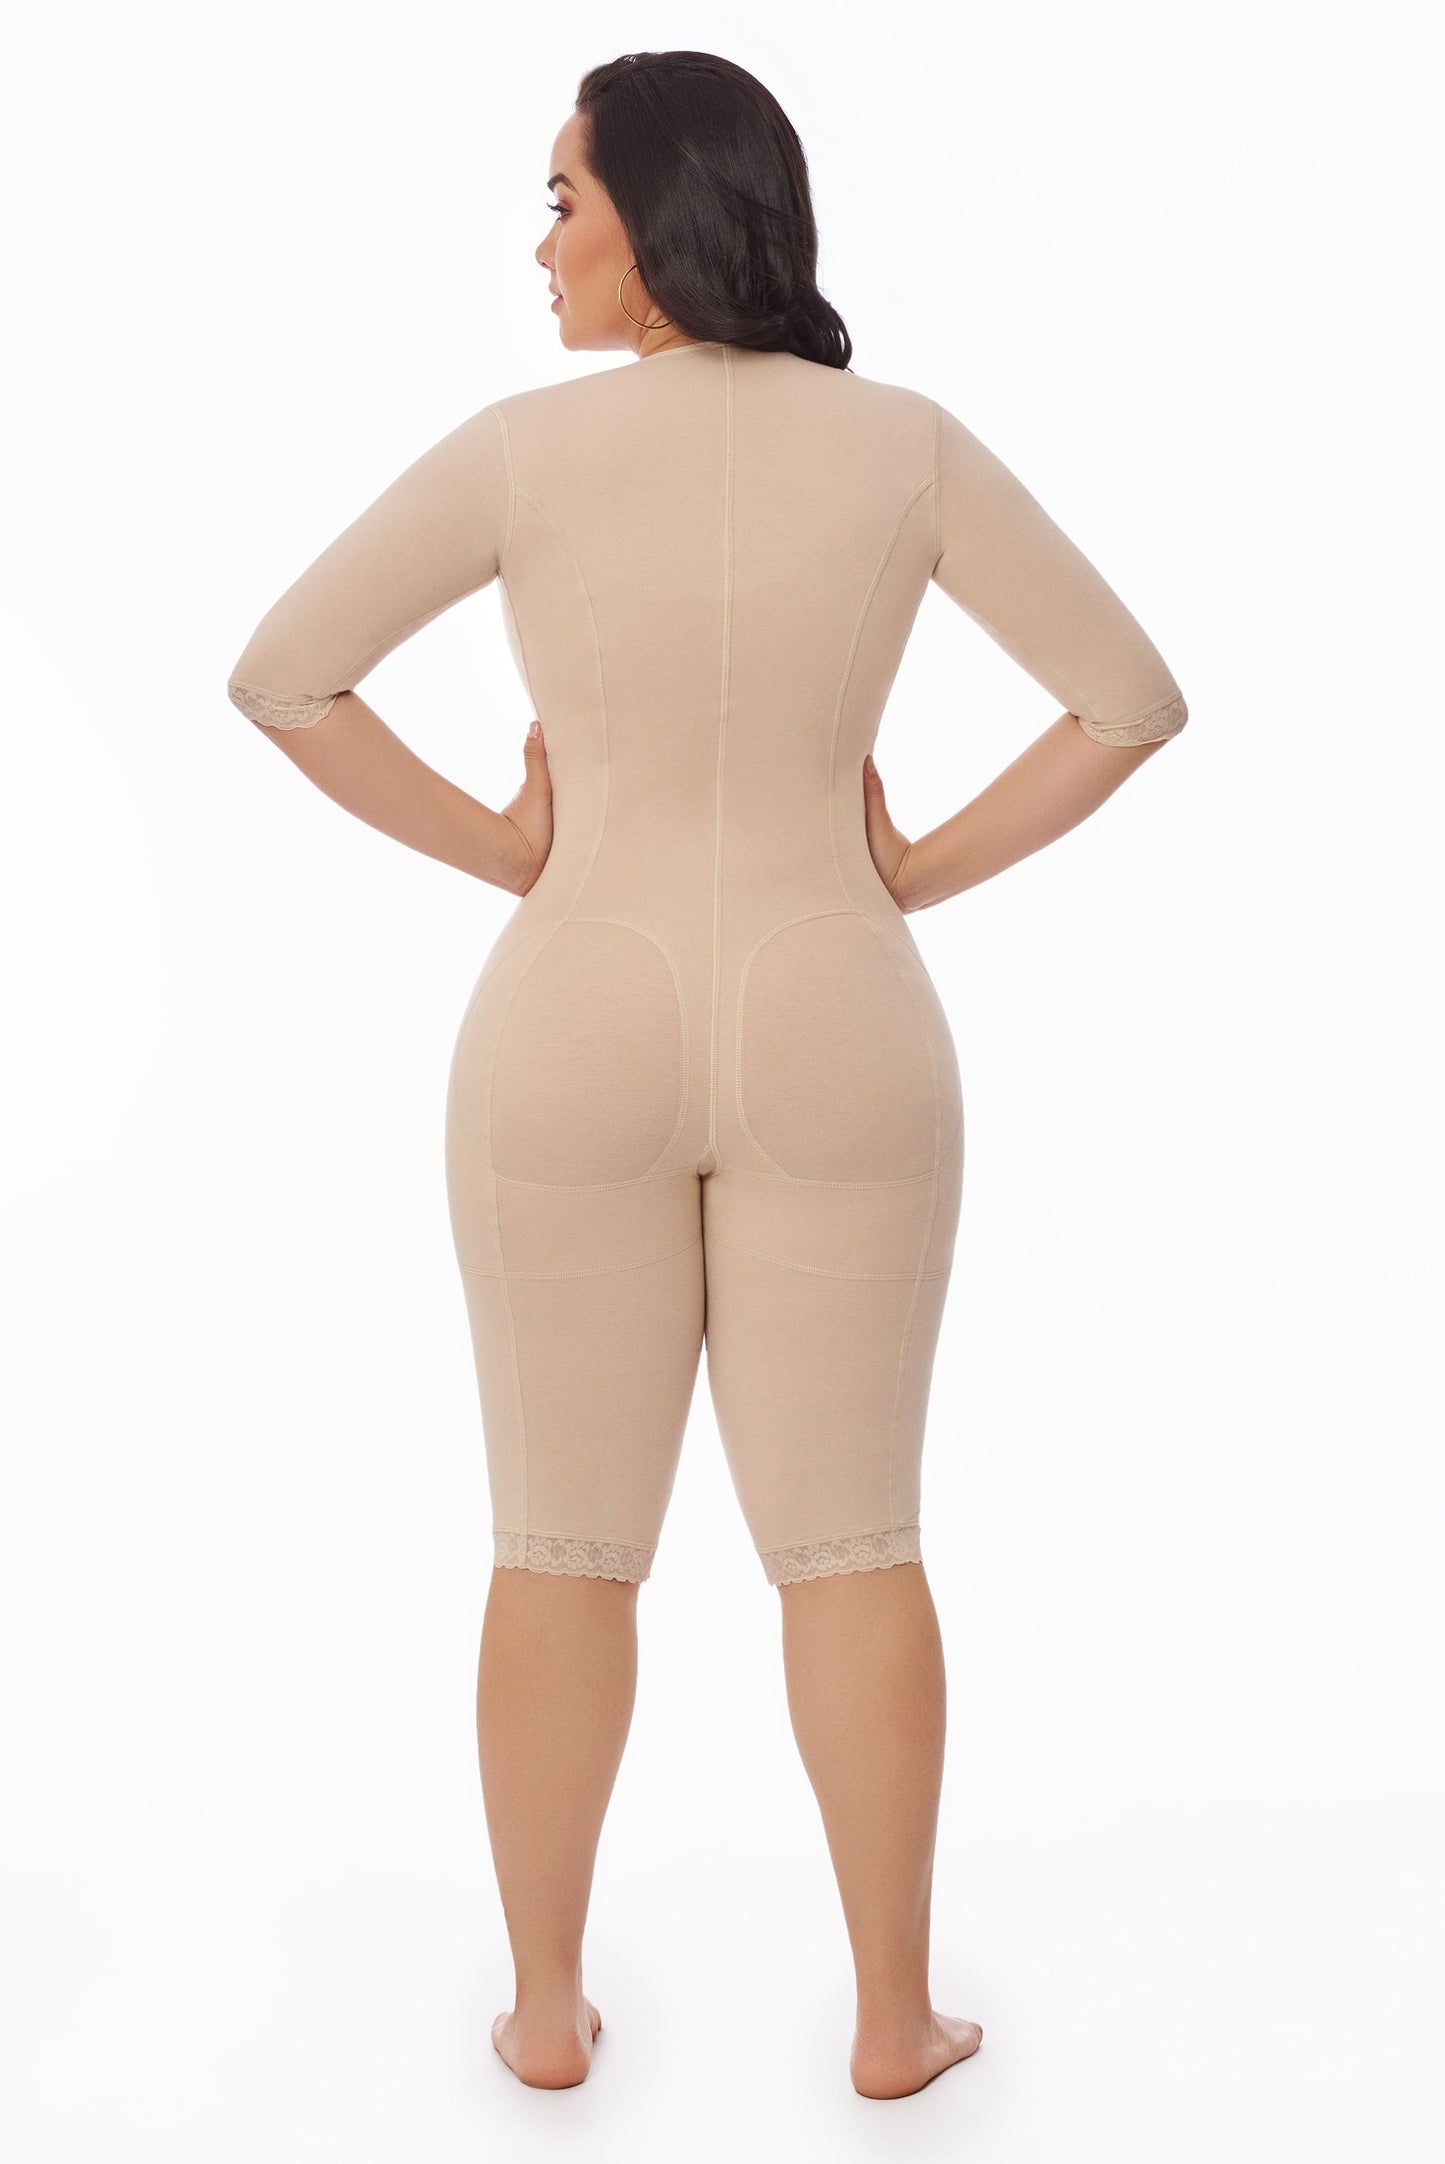 11513 - STAGE 1 BRALESS FULL BODY ABOVE KNEE FAJA WITH SLEEVES